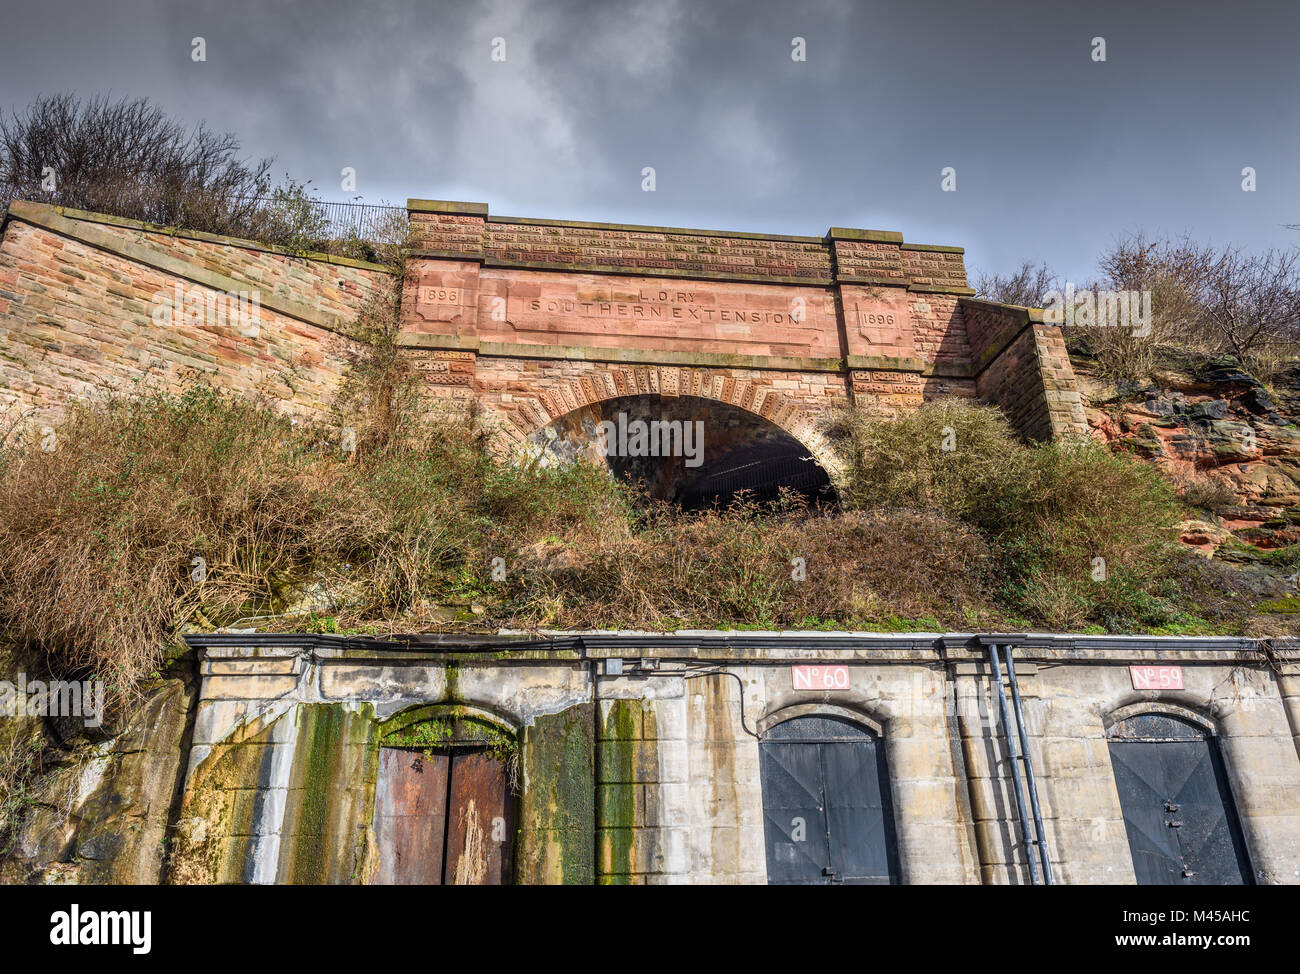 The abandoned Southern extension tunnel portal at Herculaneum Dock, built in 1896,Liverpool through a sandstone face. The Liverpool Overhead Railway Stock Photo